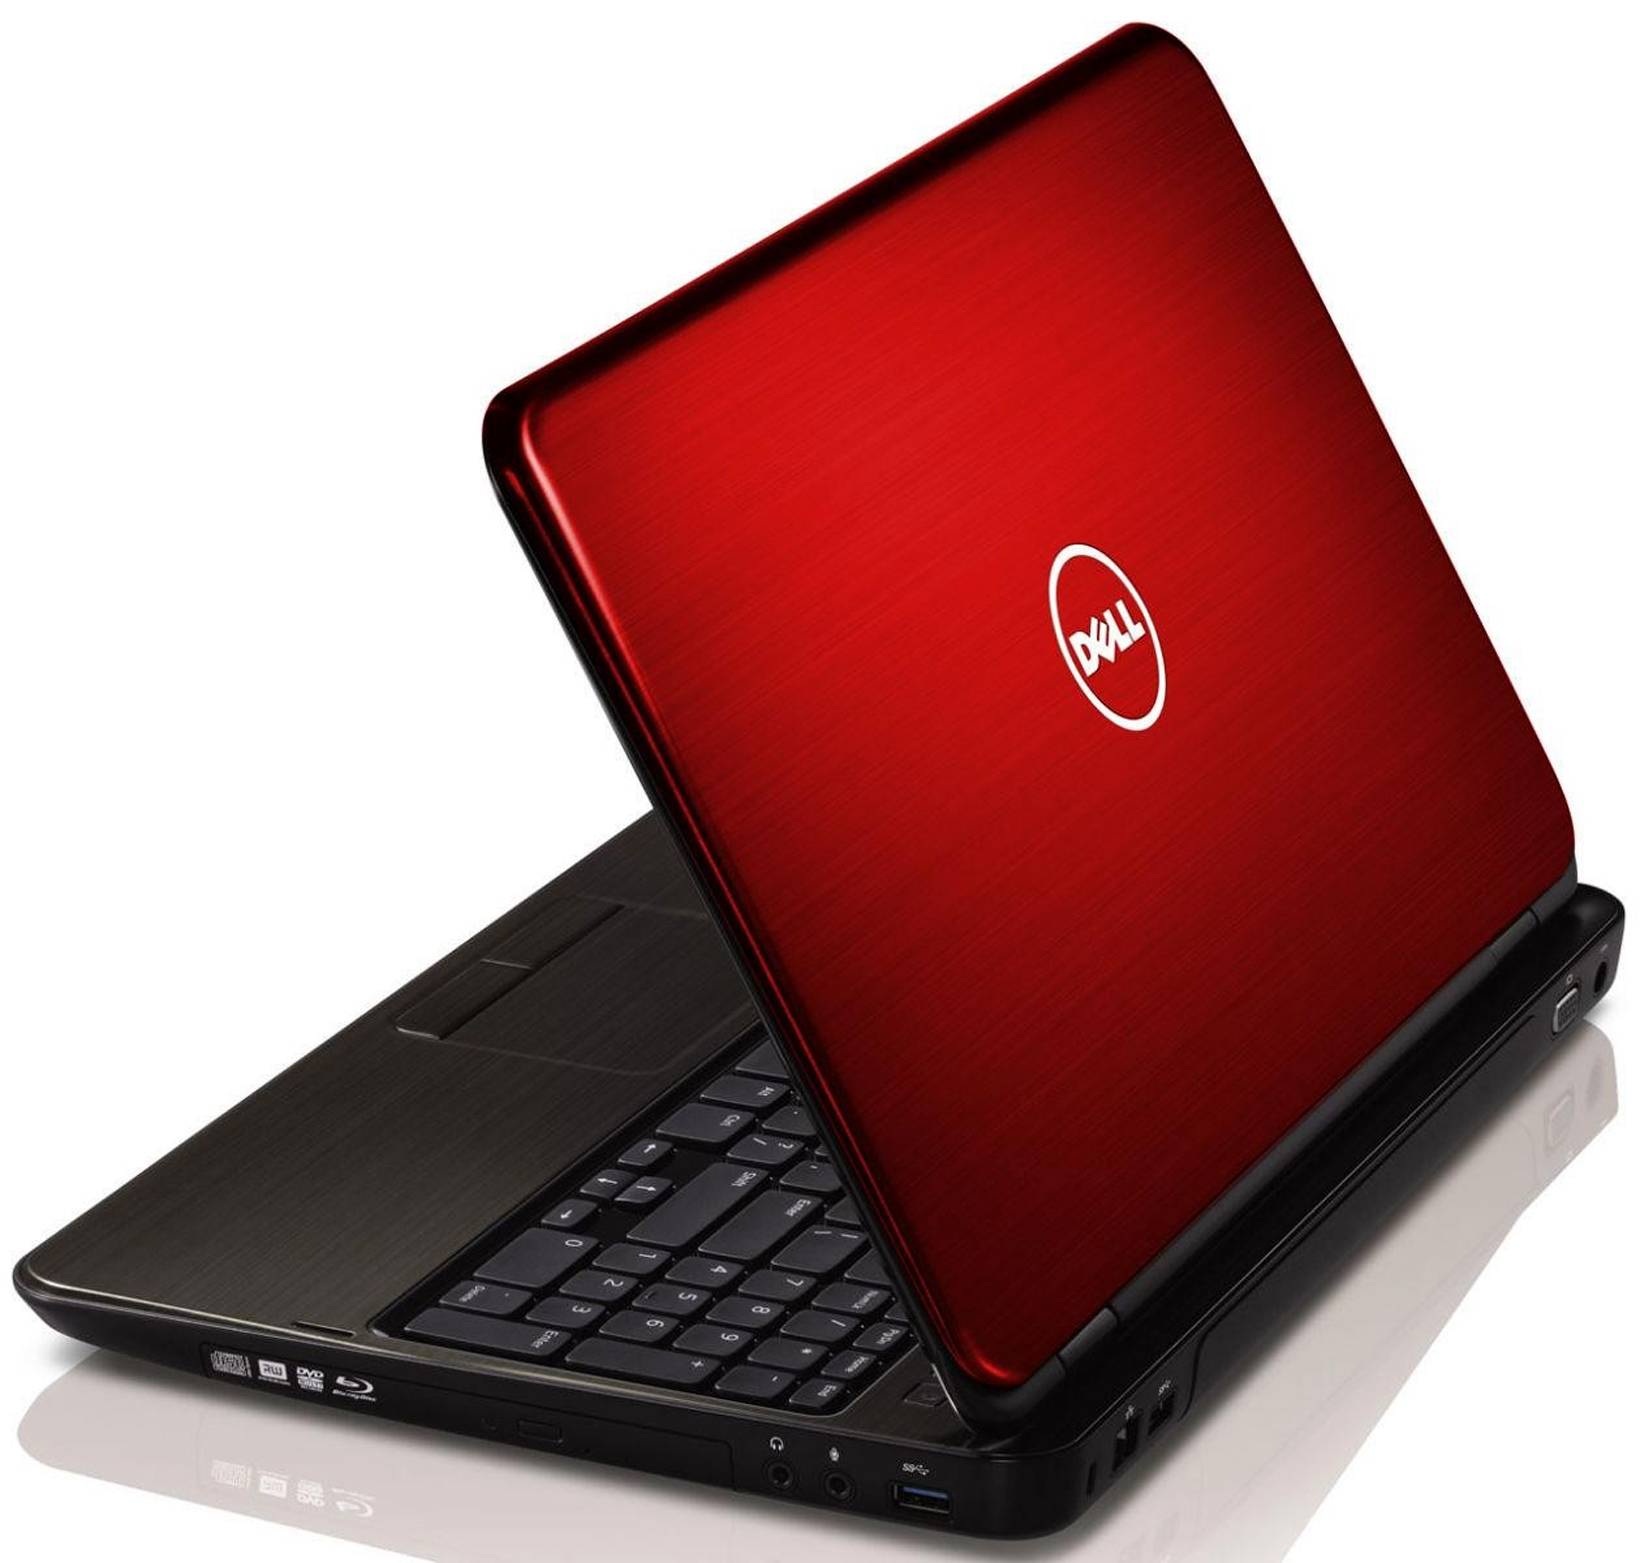 Harga laptop dell: Dell Inspiron 14 (N4050) Laptop RED